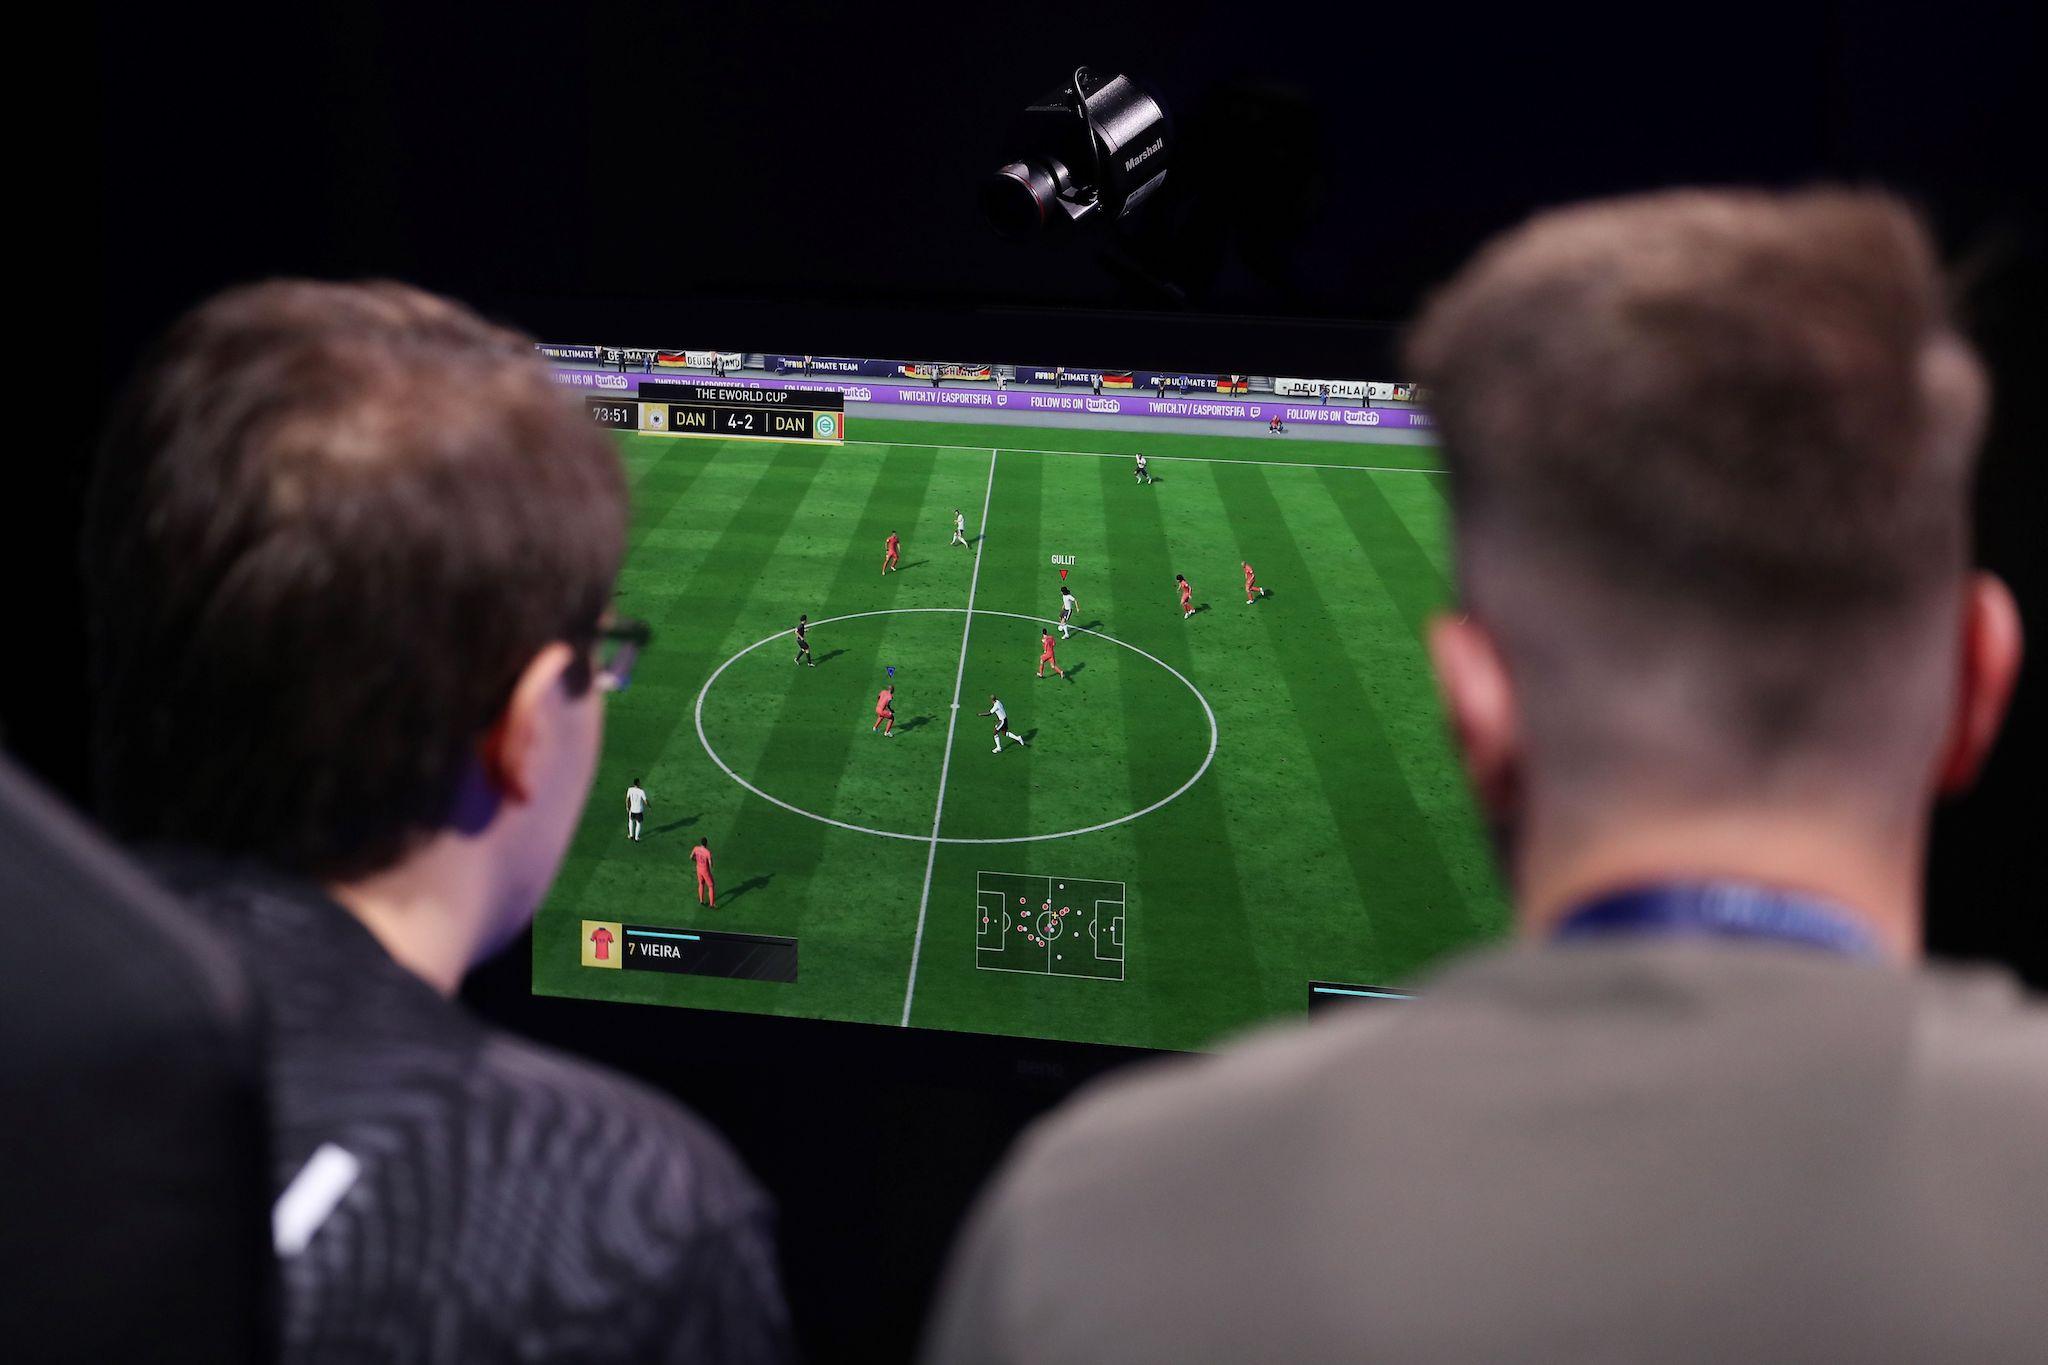 A player competes on in the group stages of the FIFA eWorld Cup Grand Final, at the O2 in London on August 2, 2018